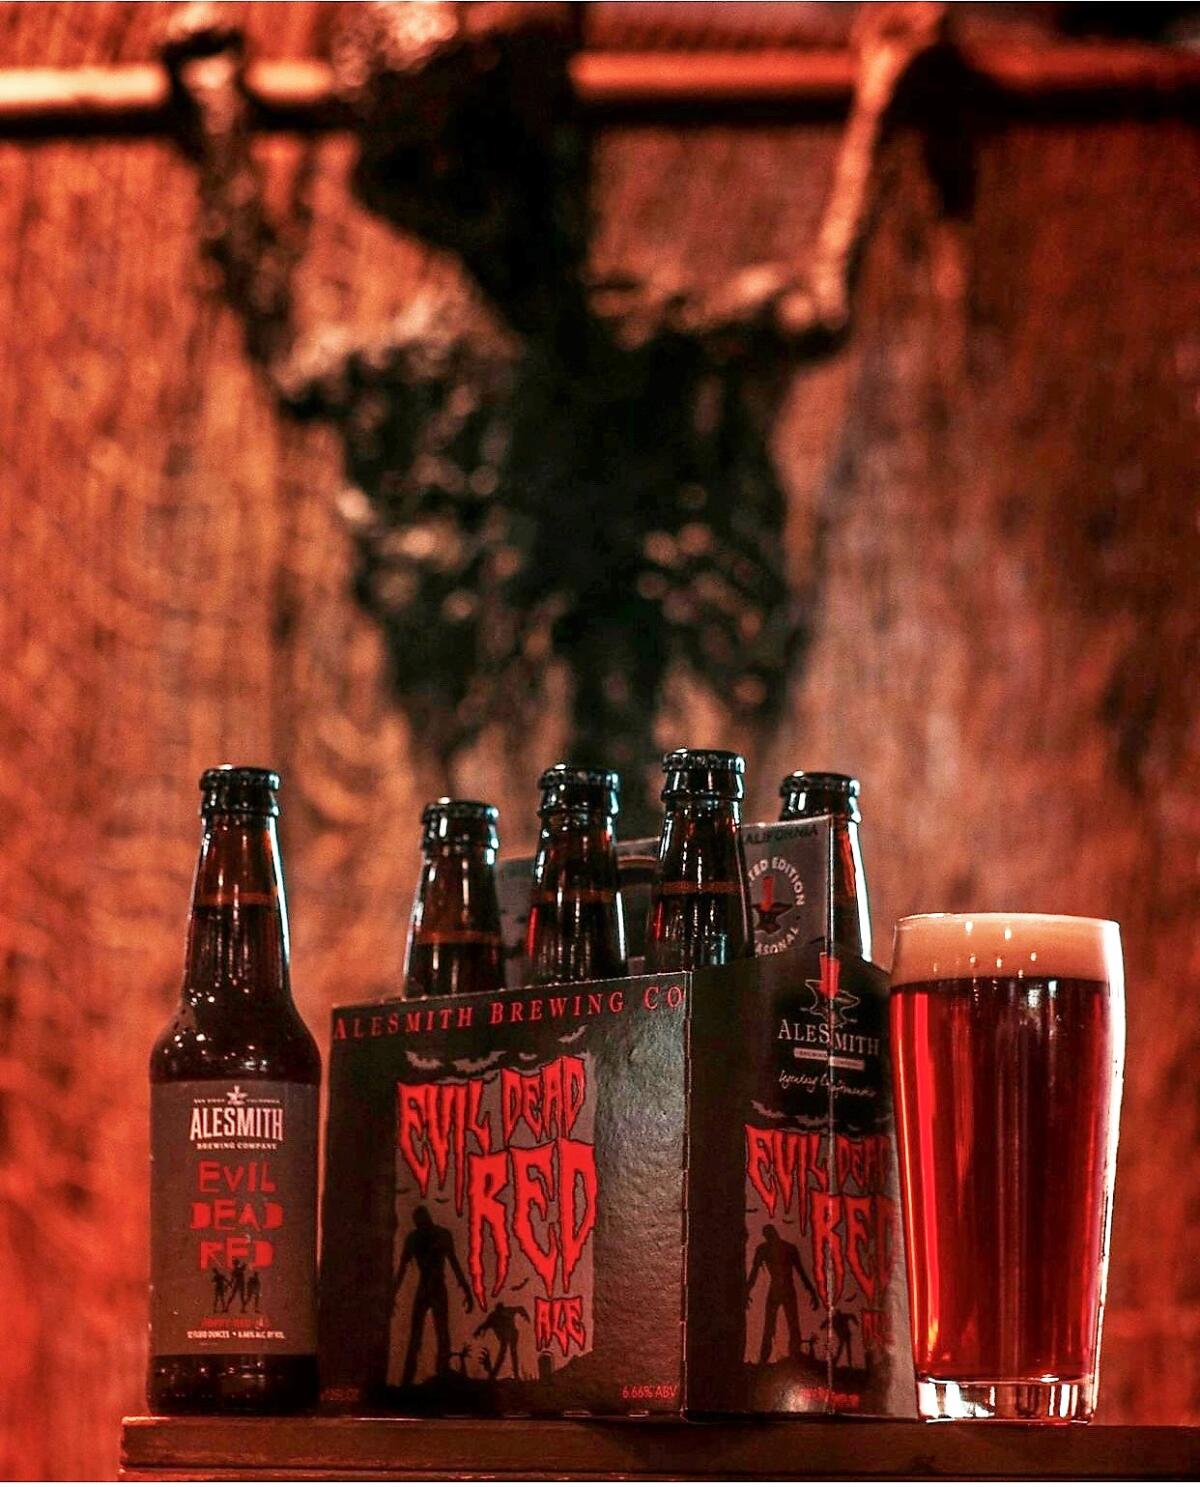 Evil Dead Red, a red ale from AleSmith Brewing Company.